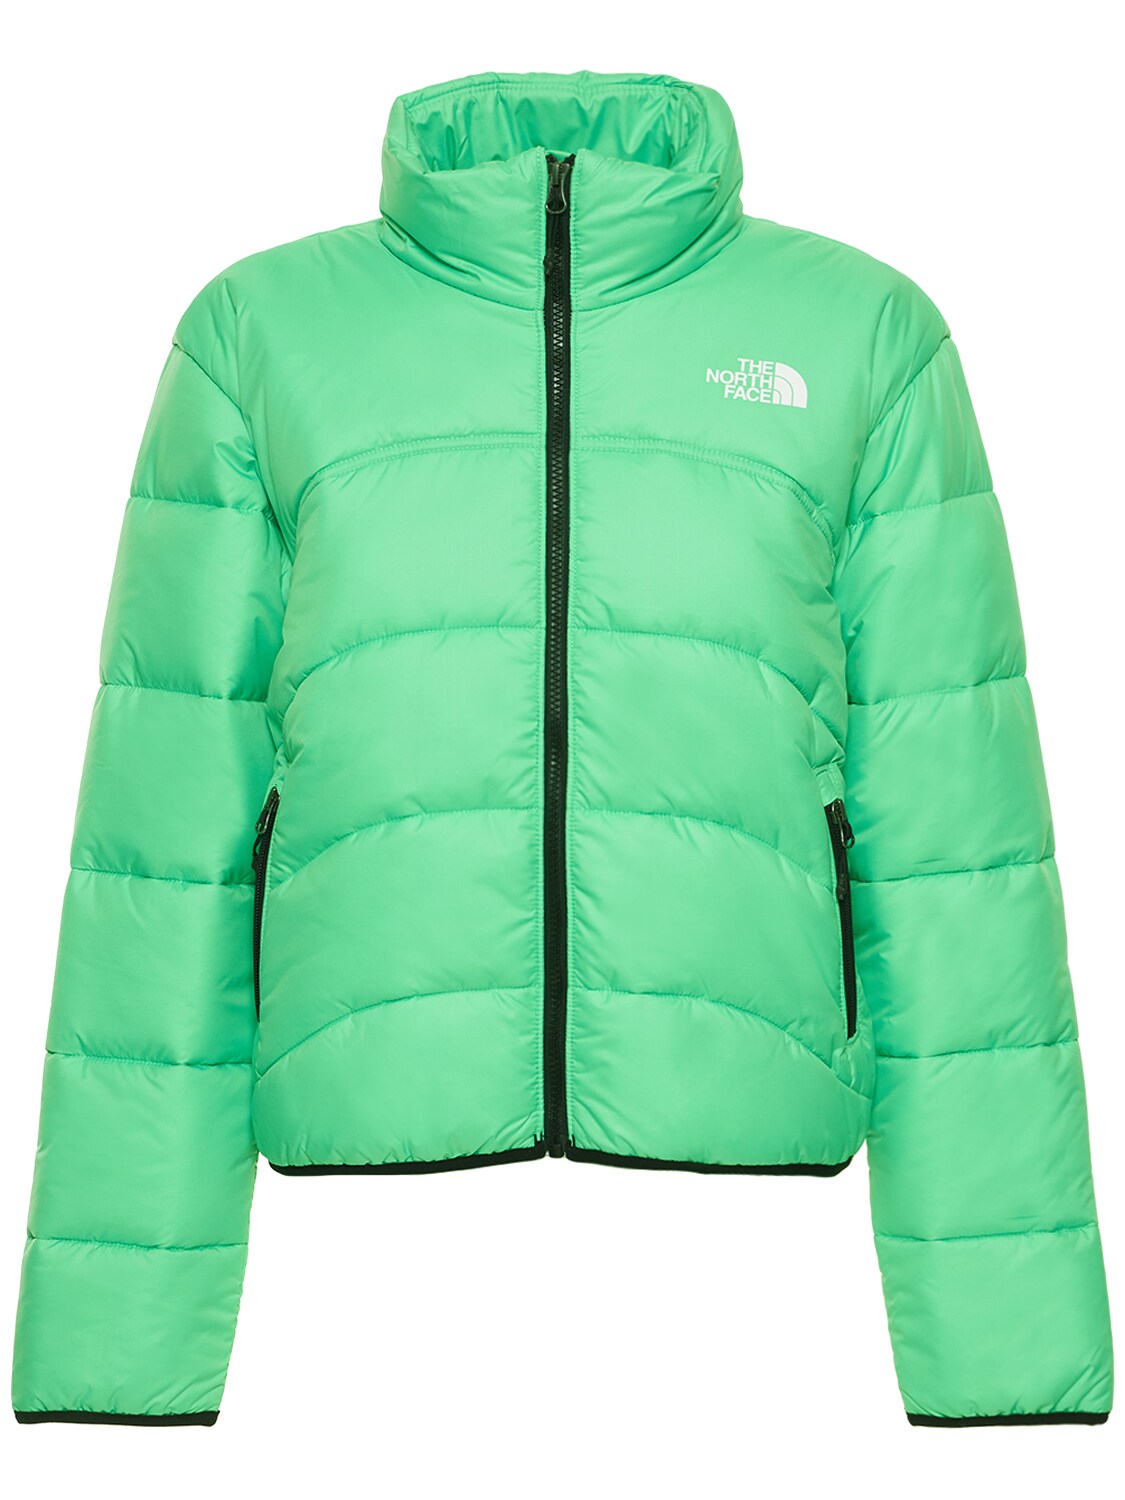 THE NORTH FACE ELEMENTS 2000 PUFFER JACKET